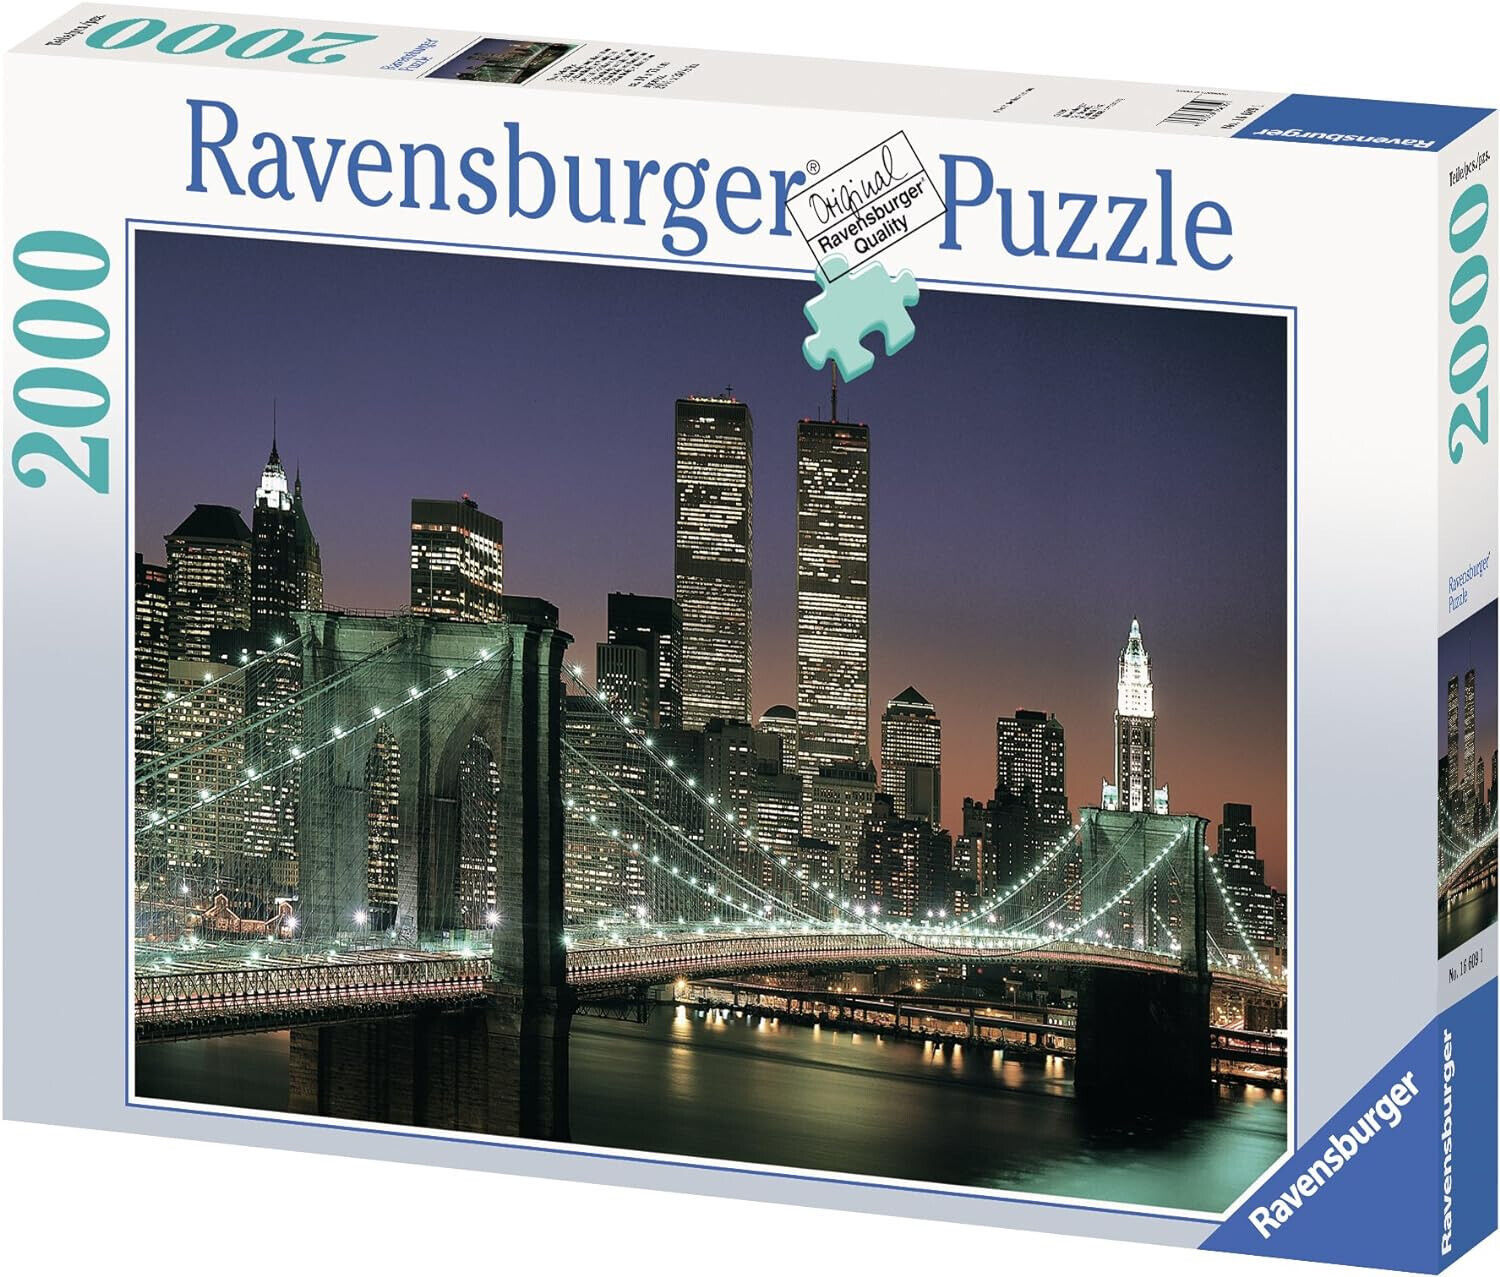 Primary image for Ravensburger Twin Towers New York Brooklyn Bridge 2000 Piece Puzzle New VTG 1995